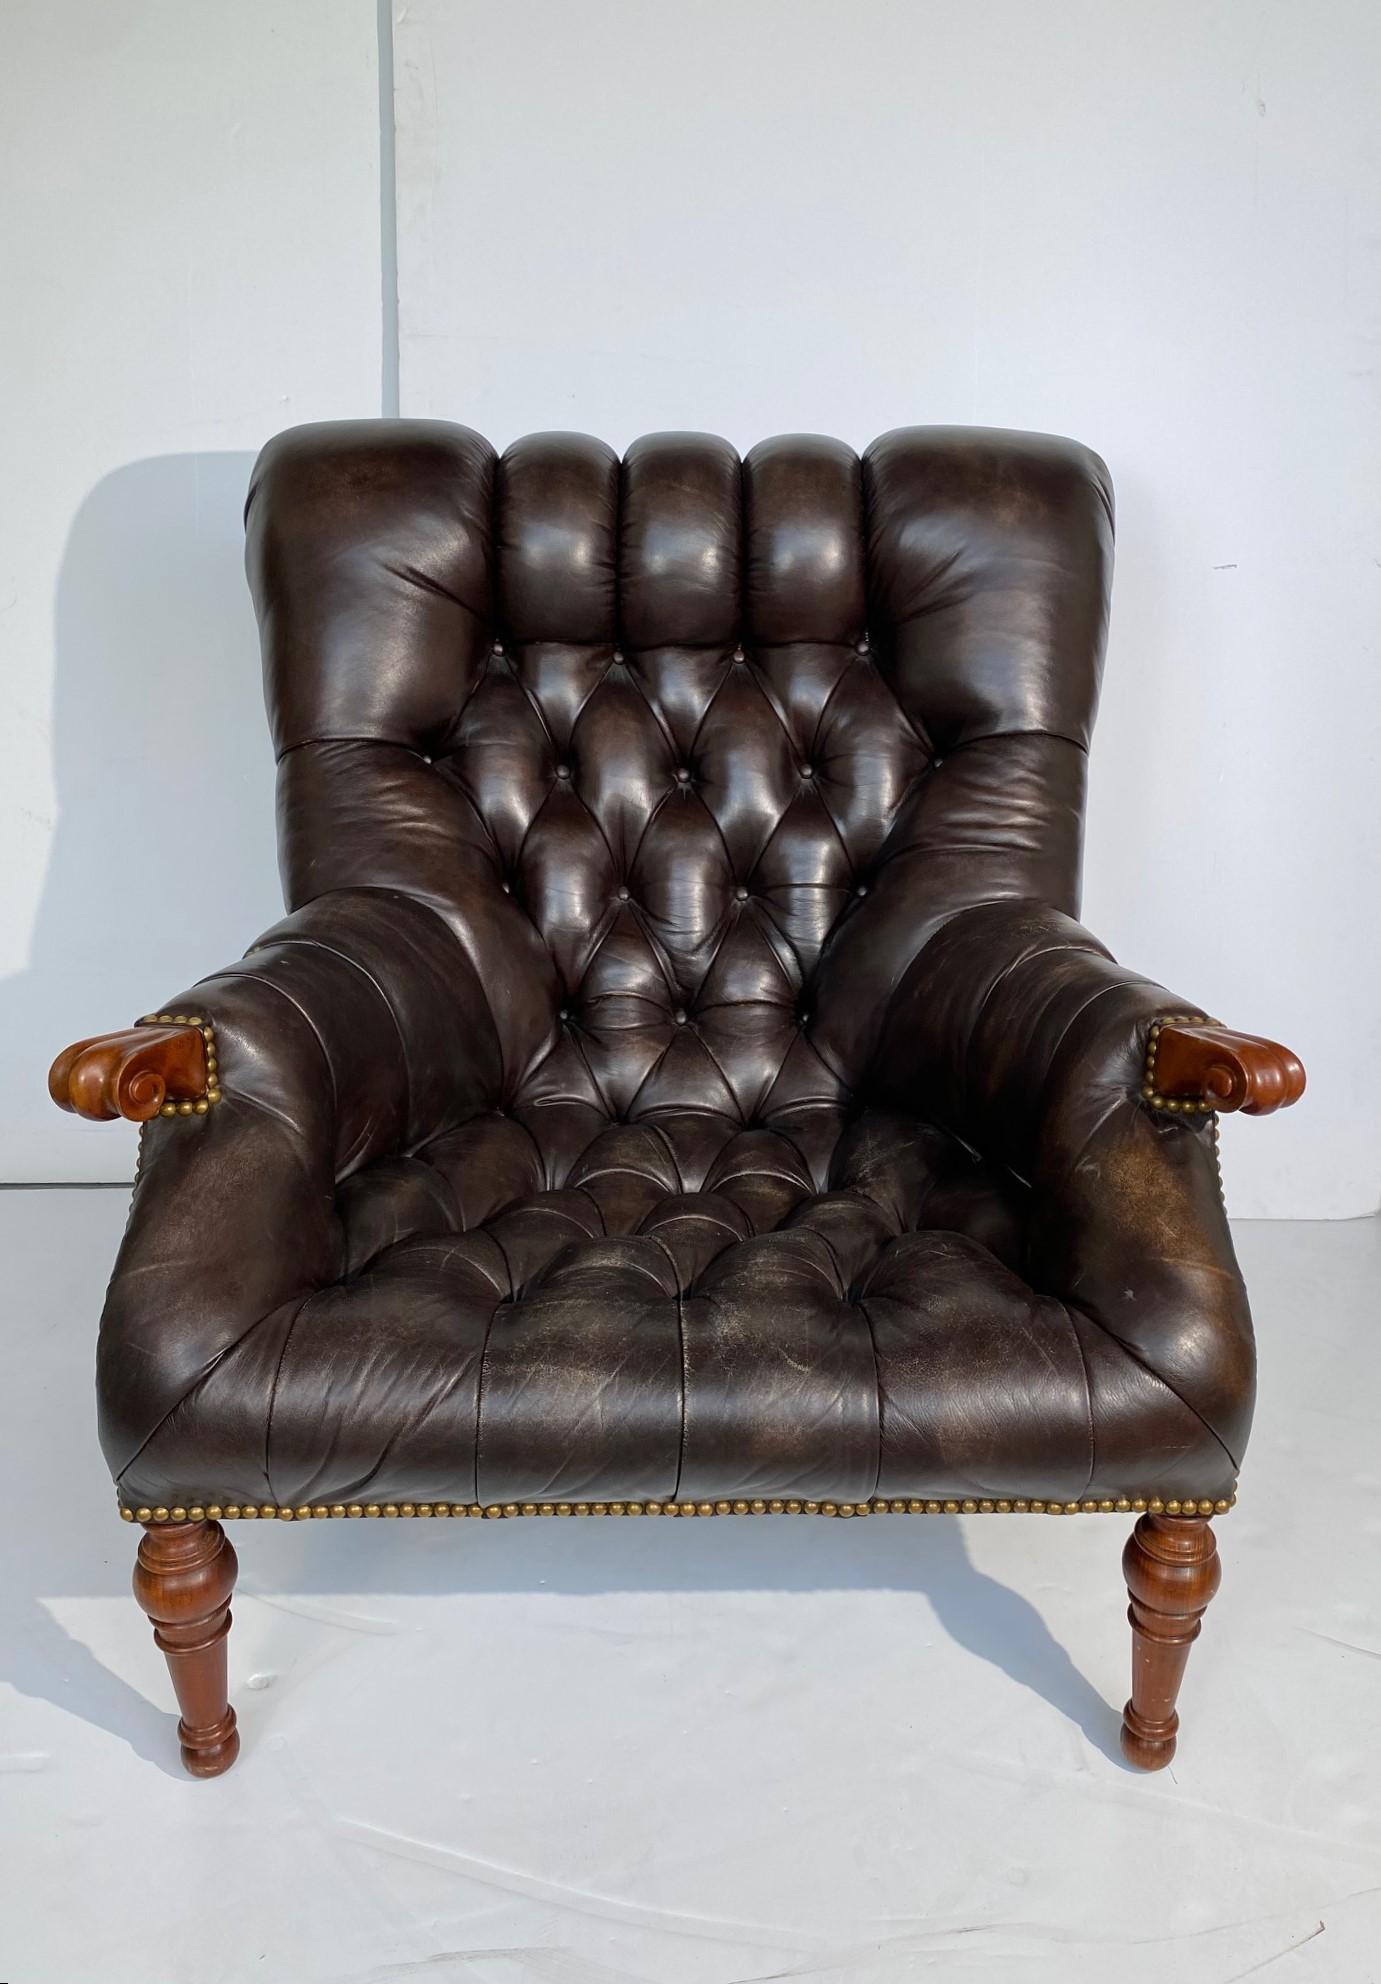 This remarkable chair is defined by its deep tufting and nailhead trim accents. A distinctive, gently sloping back and wraparound arms make it extremely comfortable, especially when combined with the coordinating ottoman. Arms carved from the finest